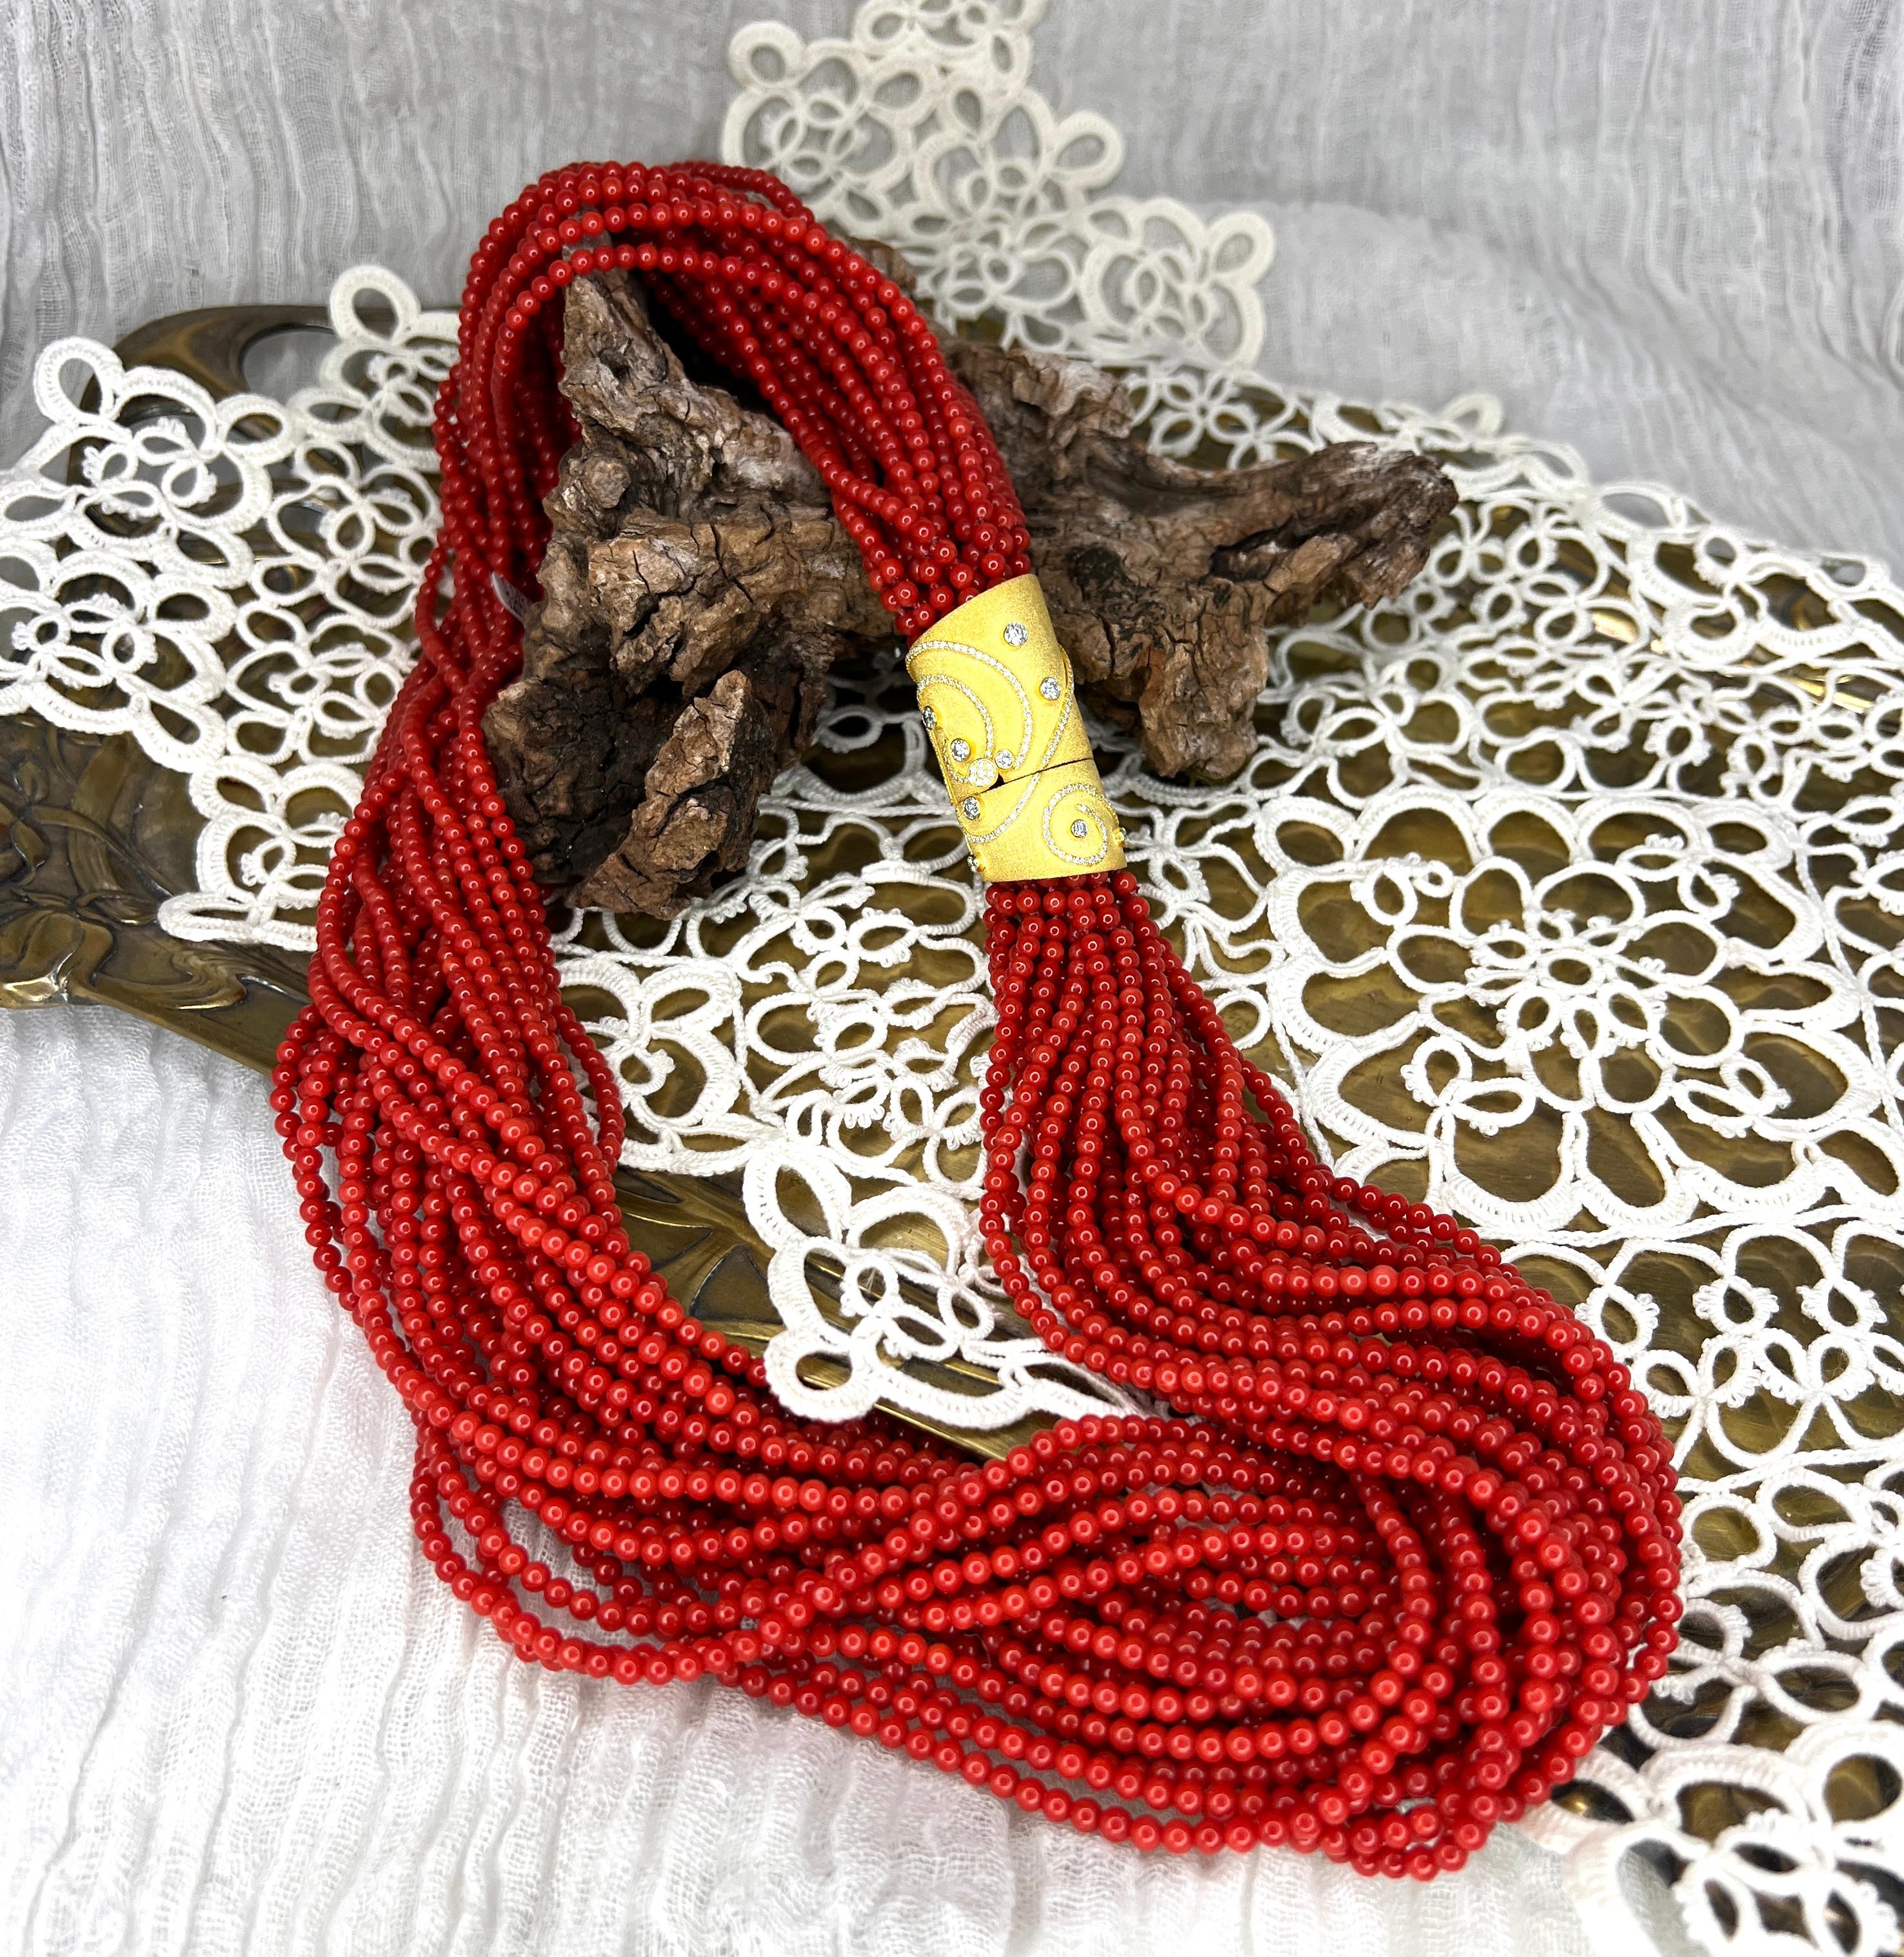 This unique S. Georgios designer necklace is a one-of-a-kind piece. These Vintage strands of Red Mediterranean Corral have been in our possession from a previous generation. Georgios, the designer knew, we needed to make an extraordinary piece. This